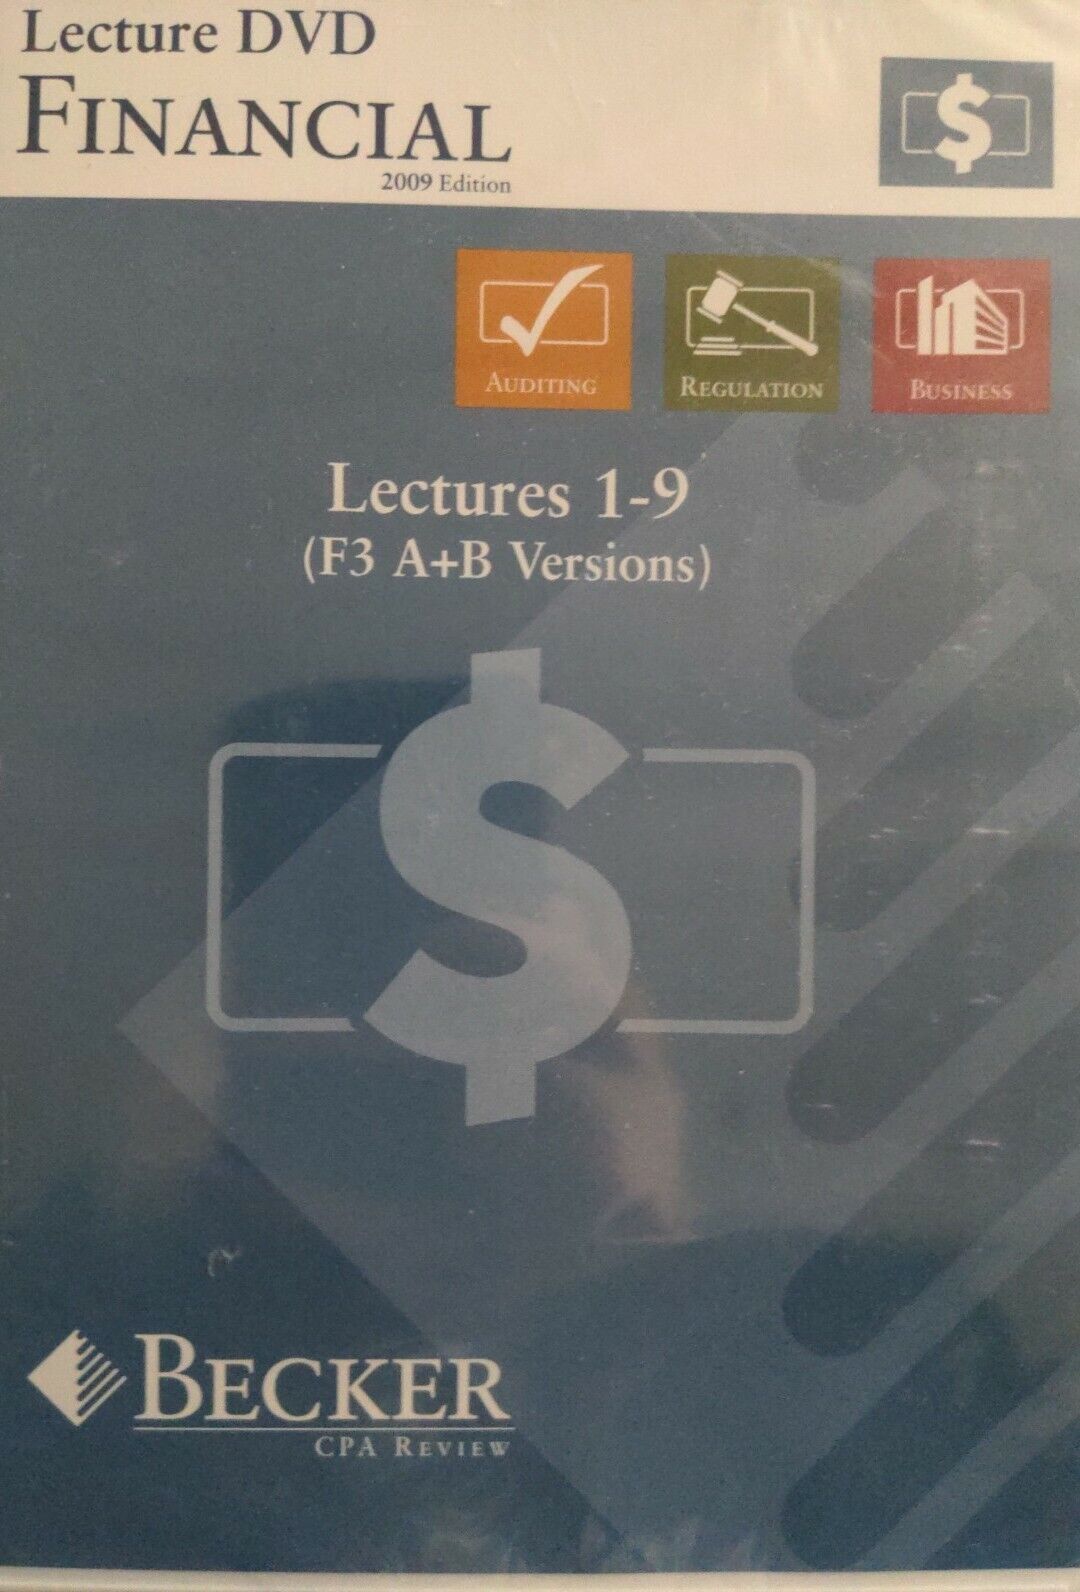 Becker CPA Review: Lecture DVD Financial 2009 Edition • Lectures 1-9... (DVD)